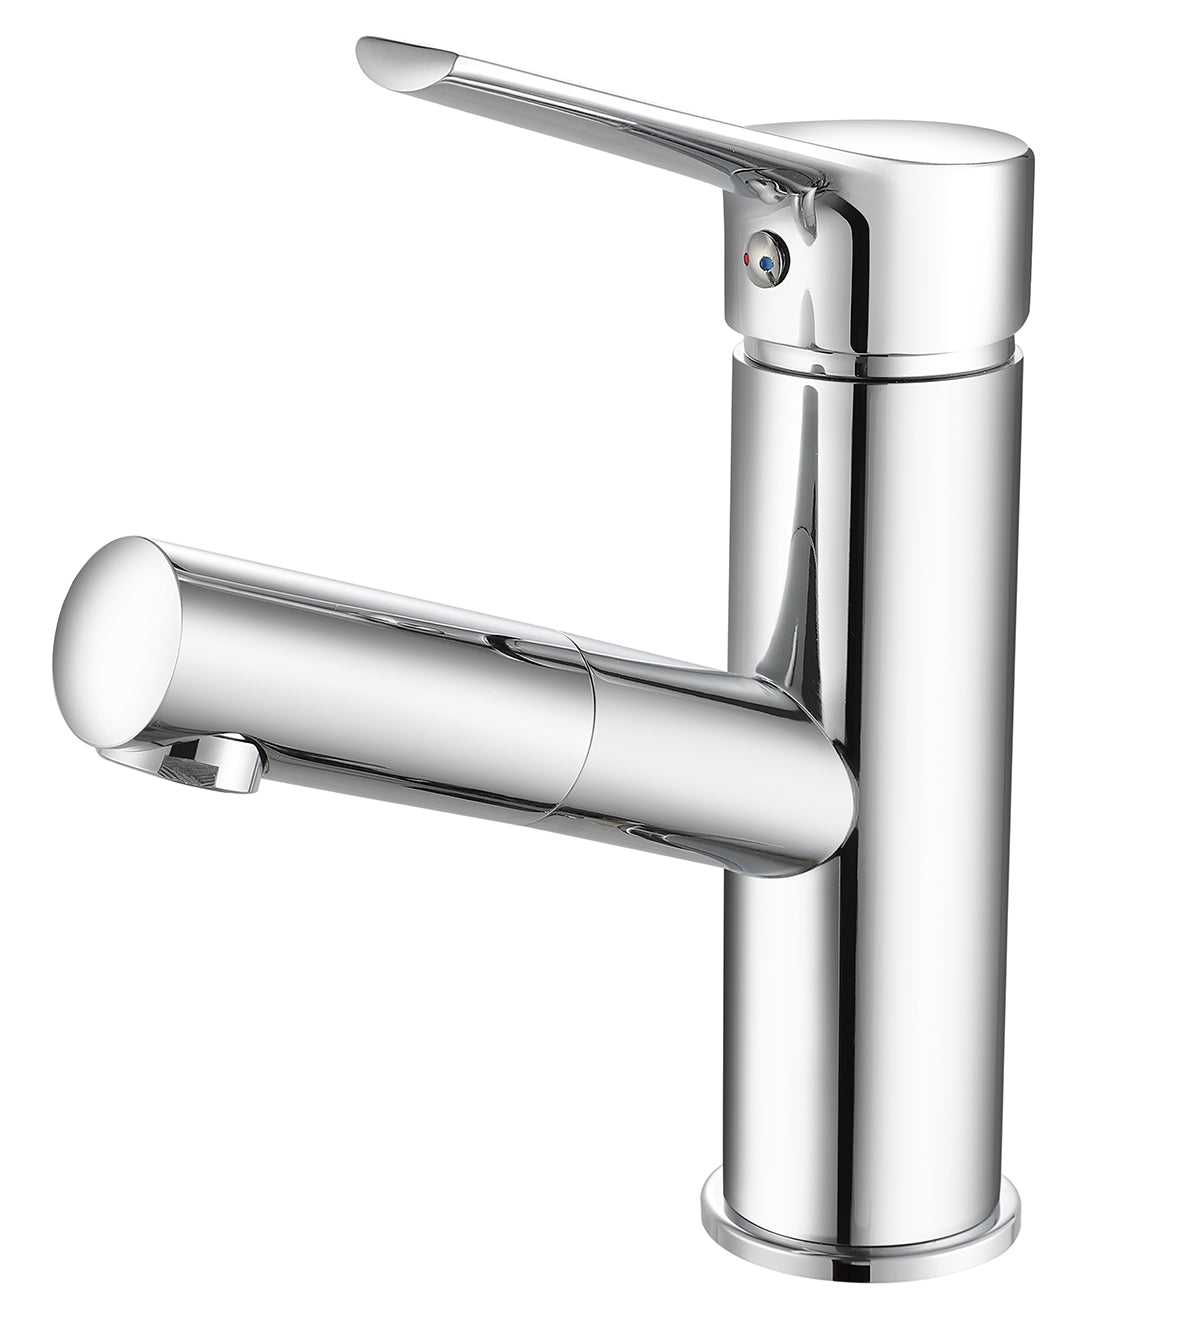 WASHBASIN MIXER WITH PULL-OUT SPRAY - ALISU SERIES